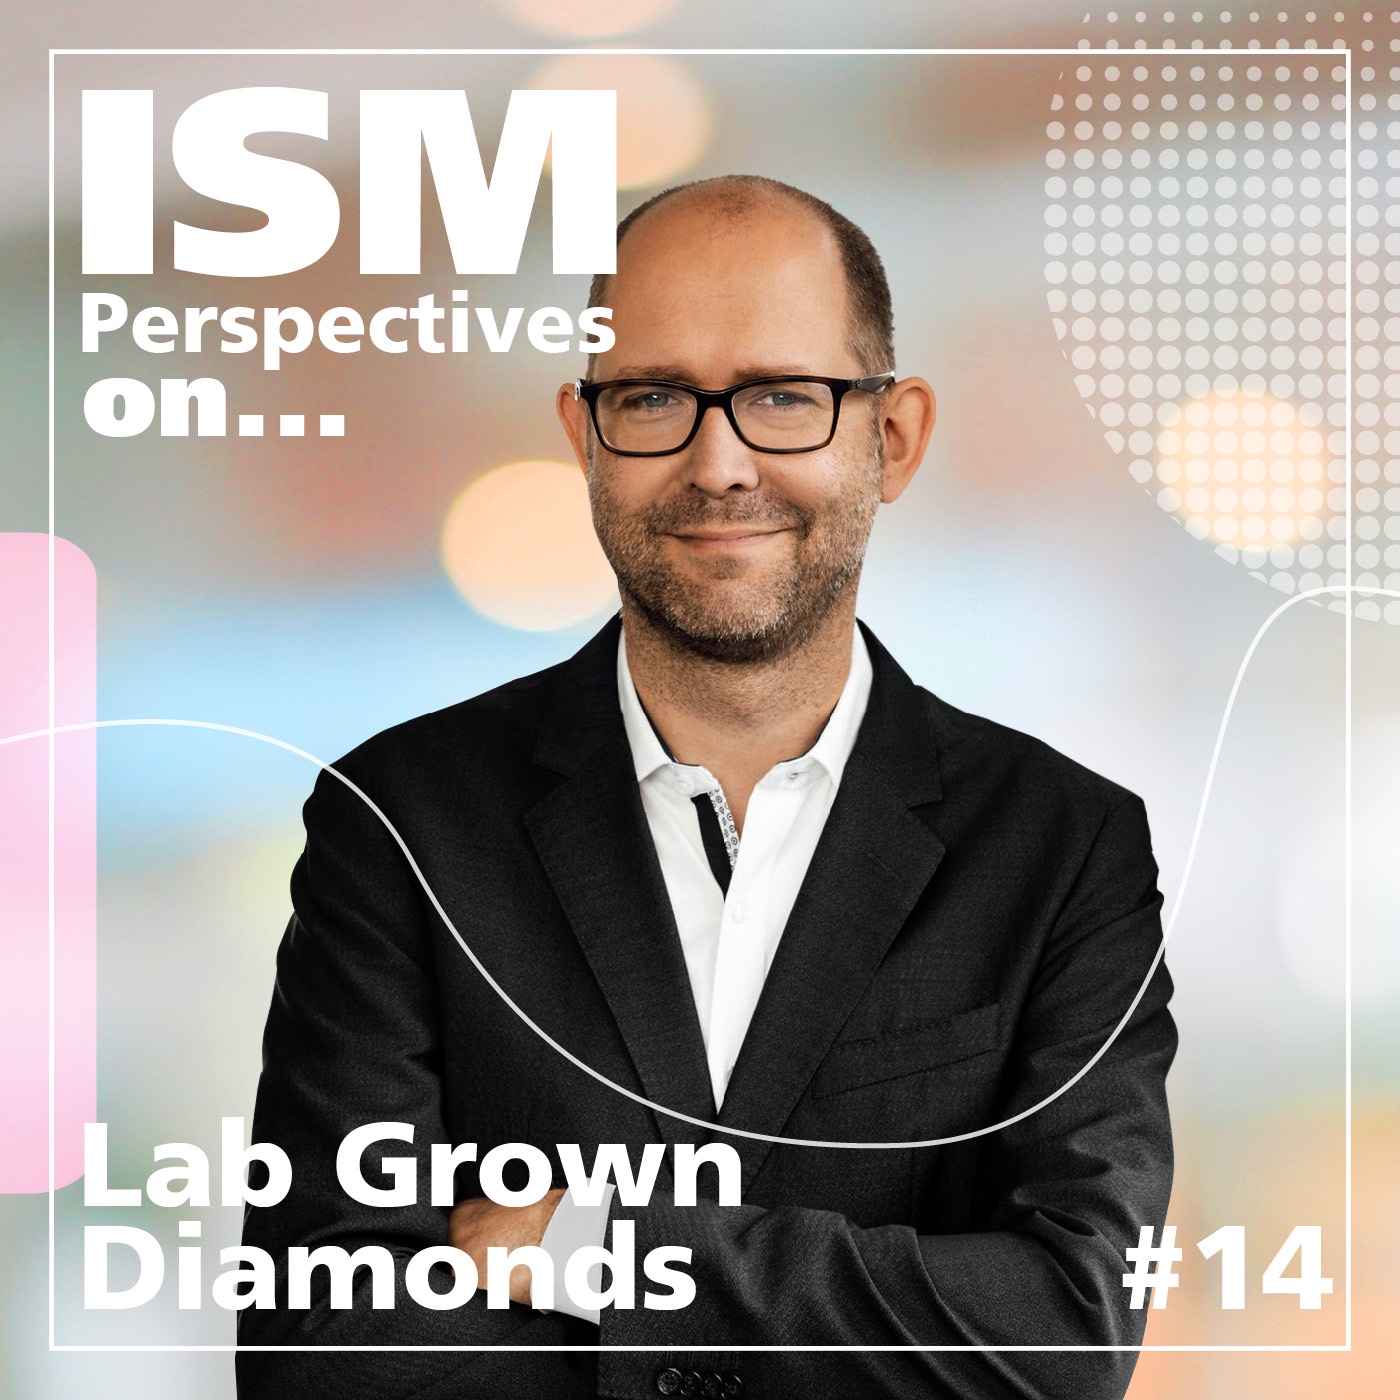 Perspectives on: Lab Grown Diamonds